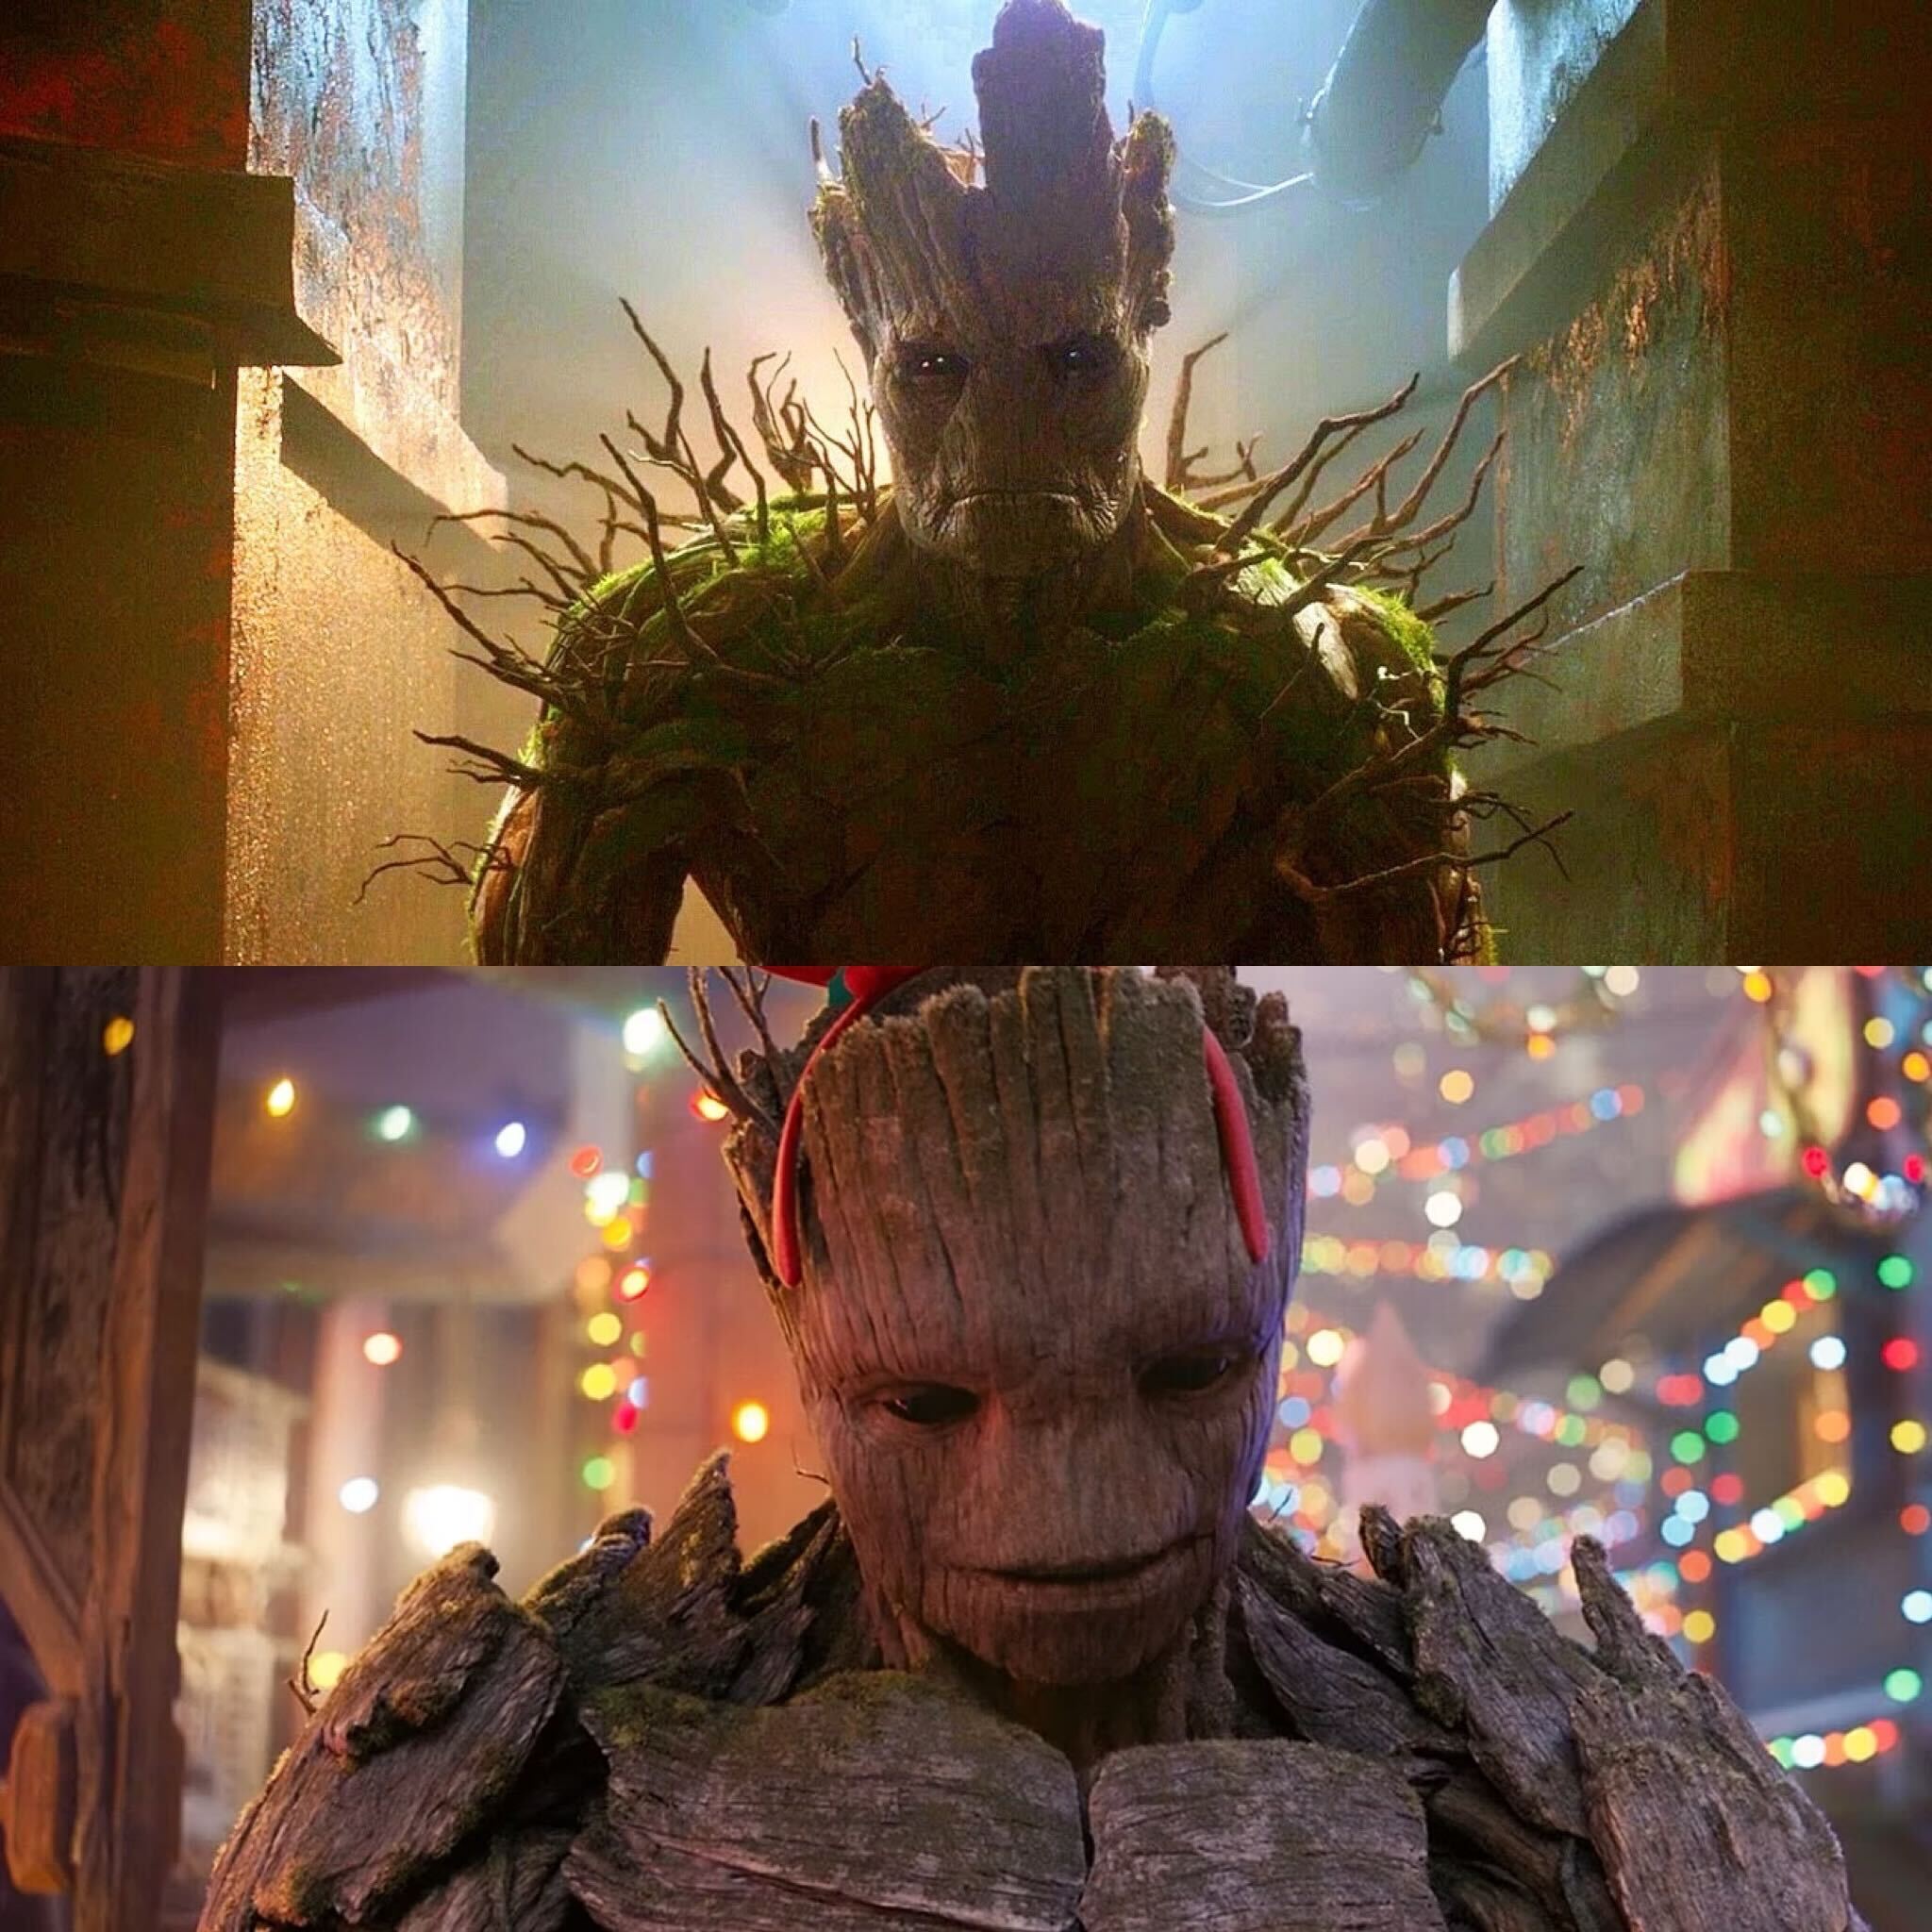 Why does Groot look different?